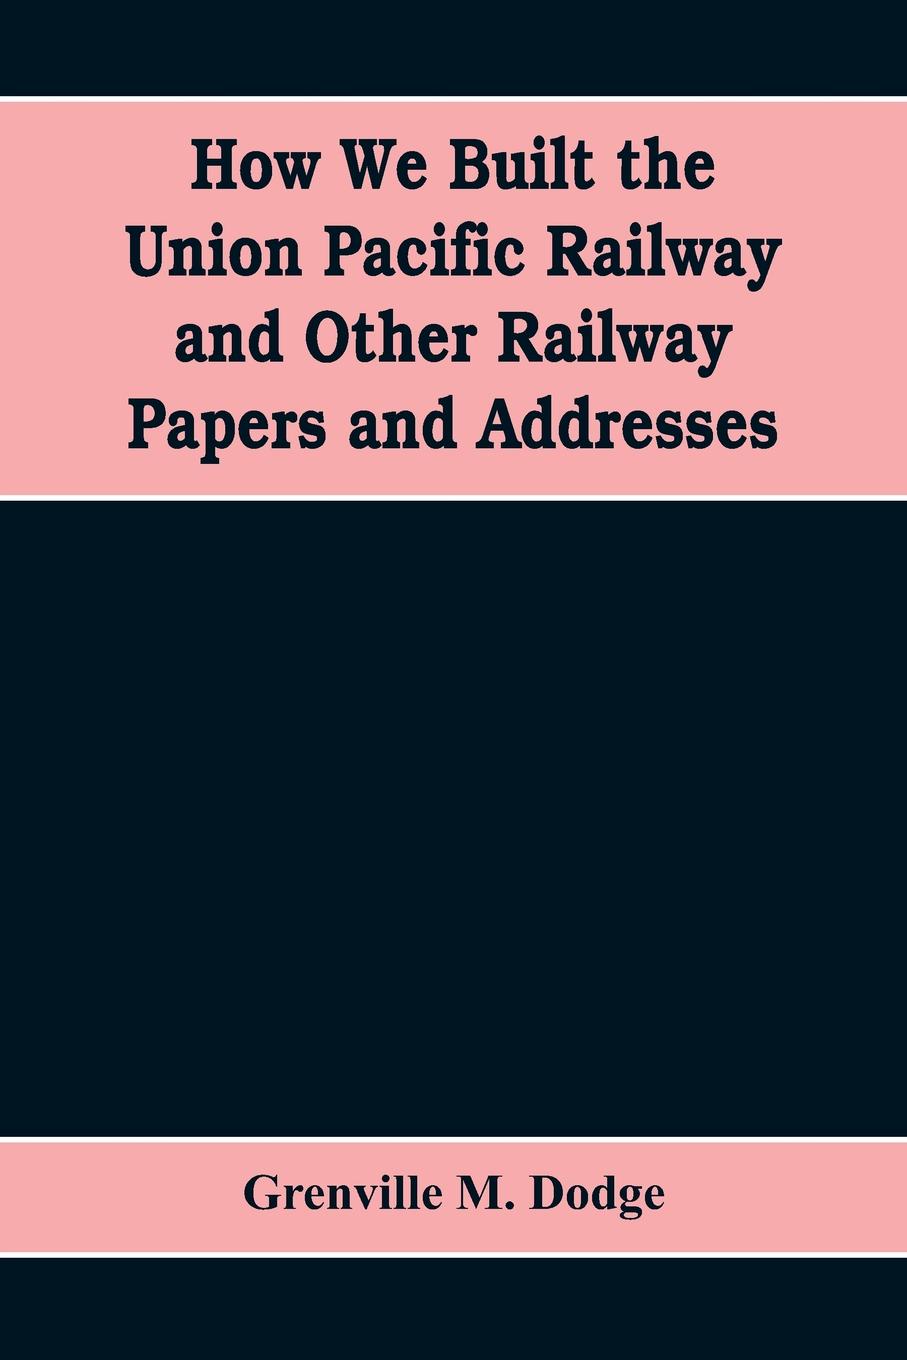 How We Built the Union Pacific Railway and Other Railway Papers and Addresses